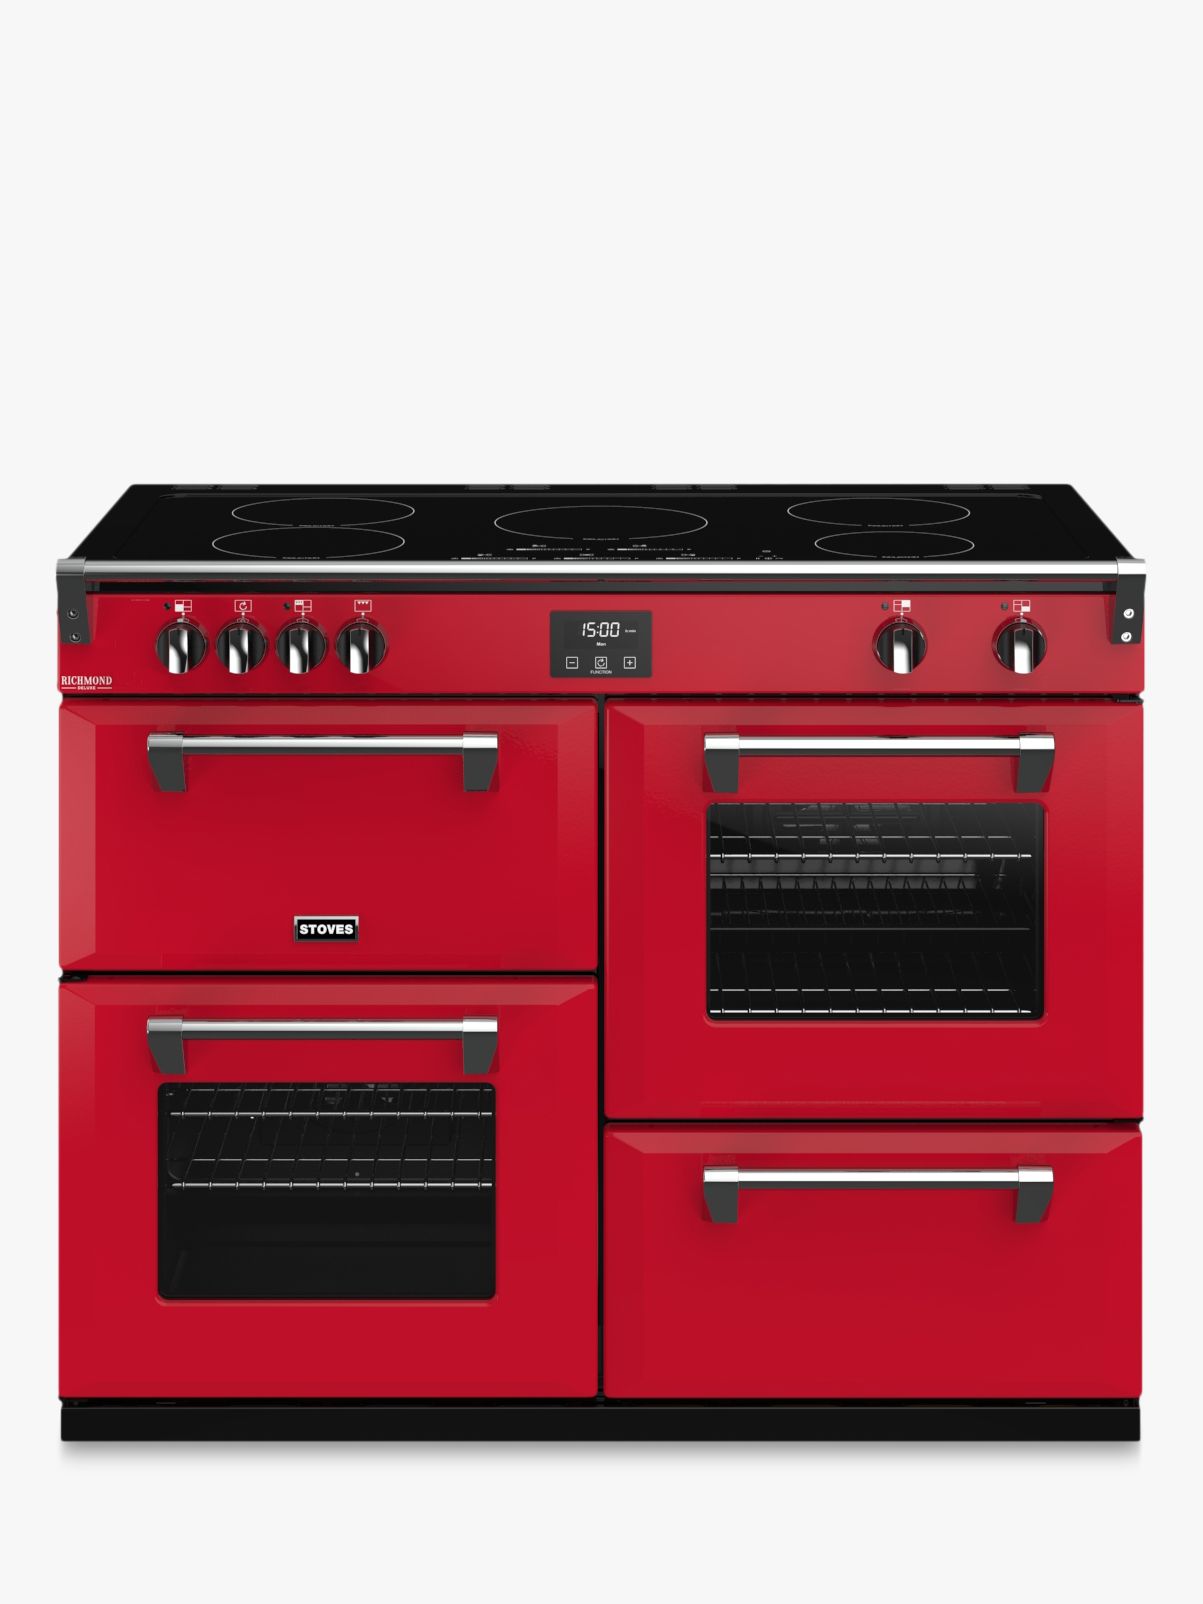 Stoves Richmond Deluxe S1100Ei Induction Range Cooker with Zeus Bluetooth Connected Timer, Hot Jalapeno